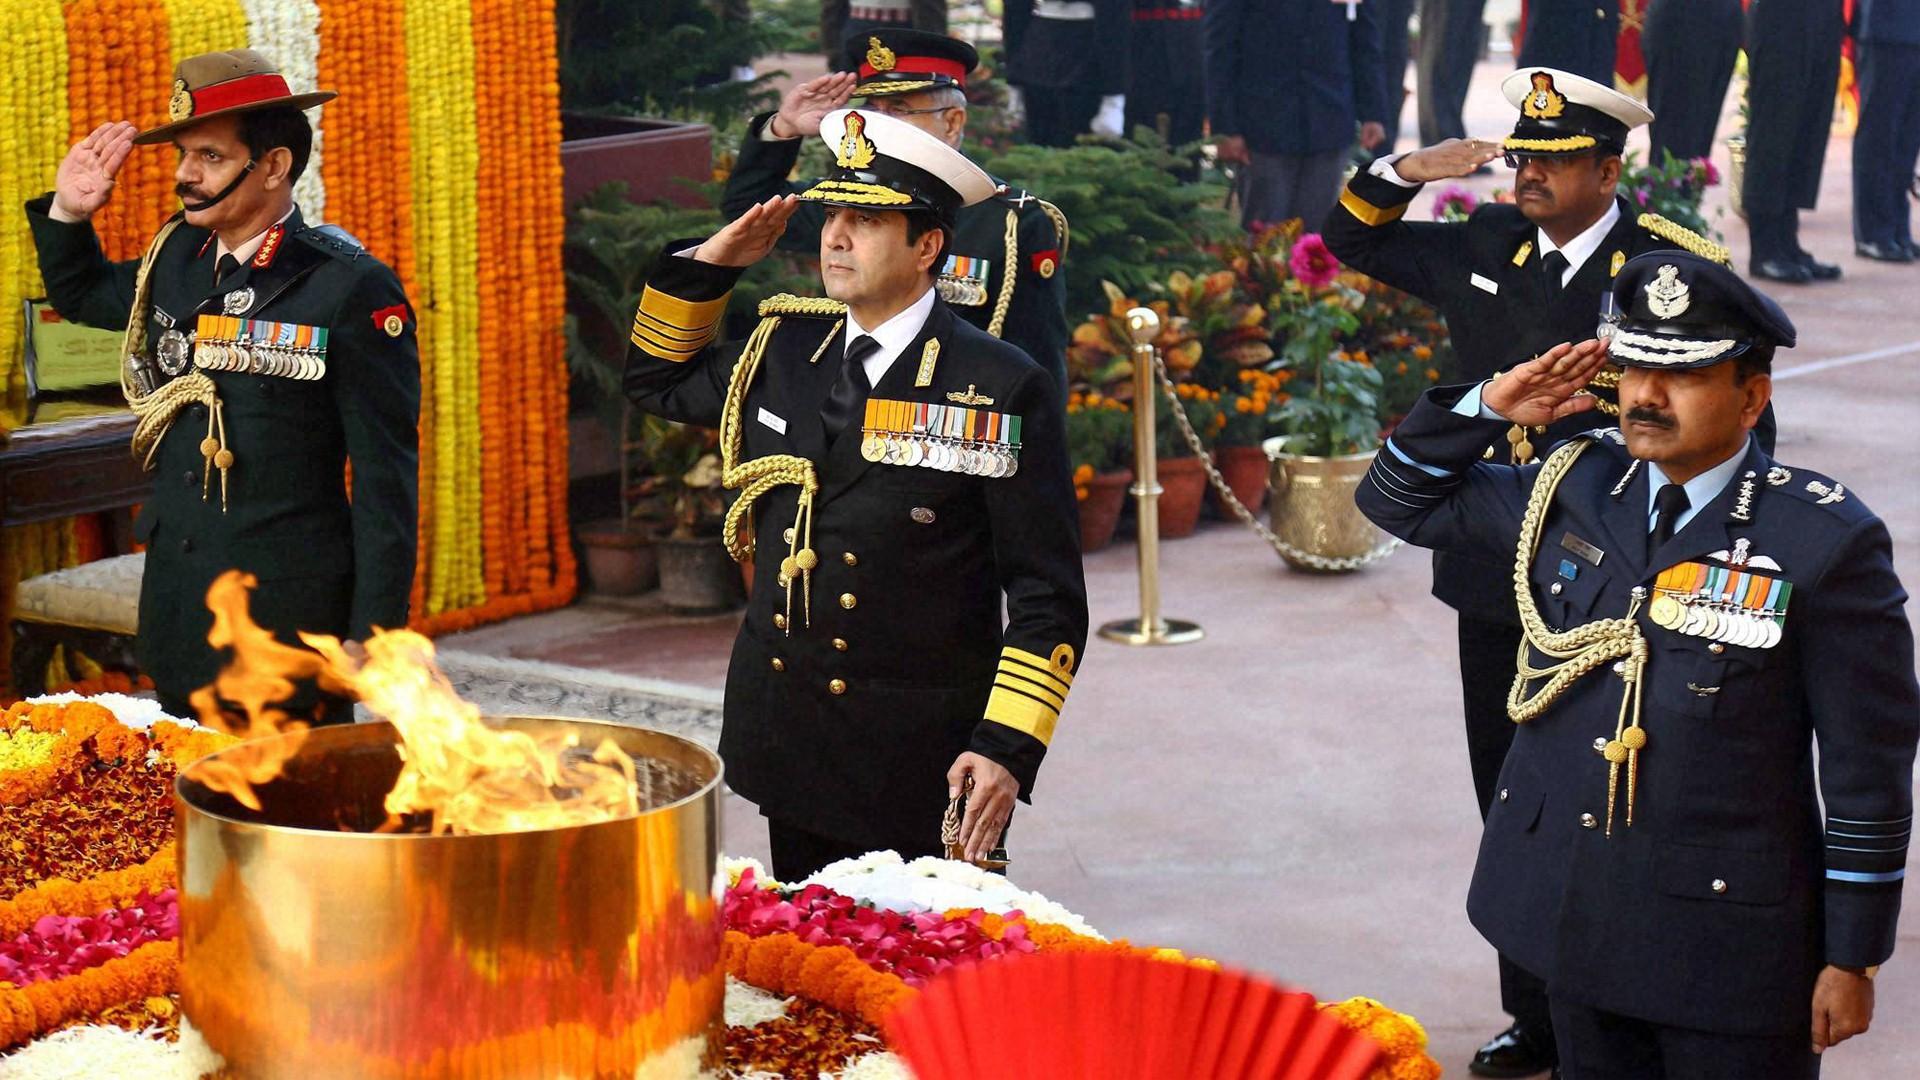 The Salutes of The Indian Soldier